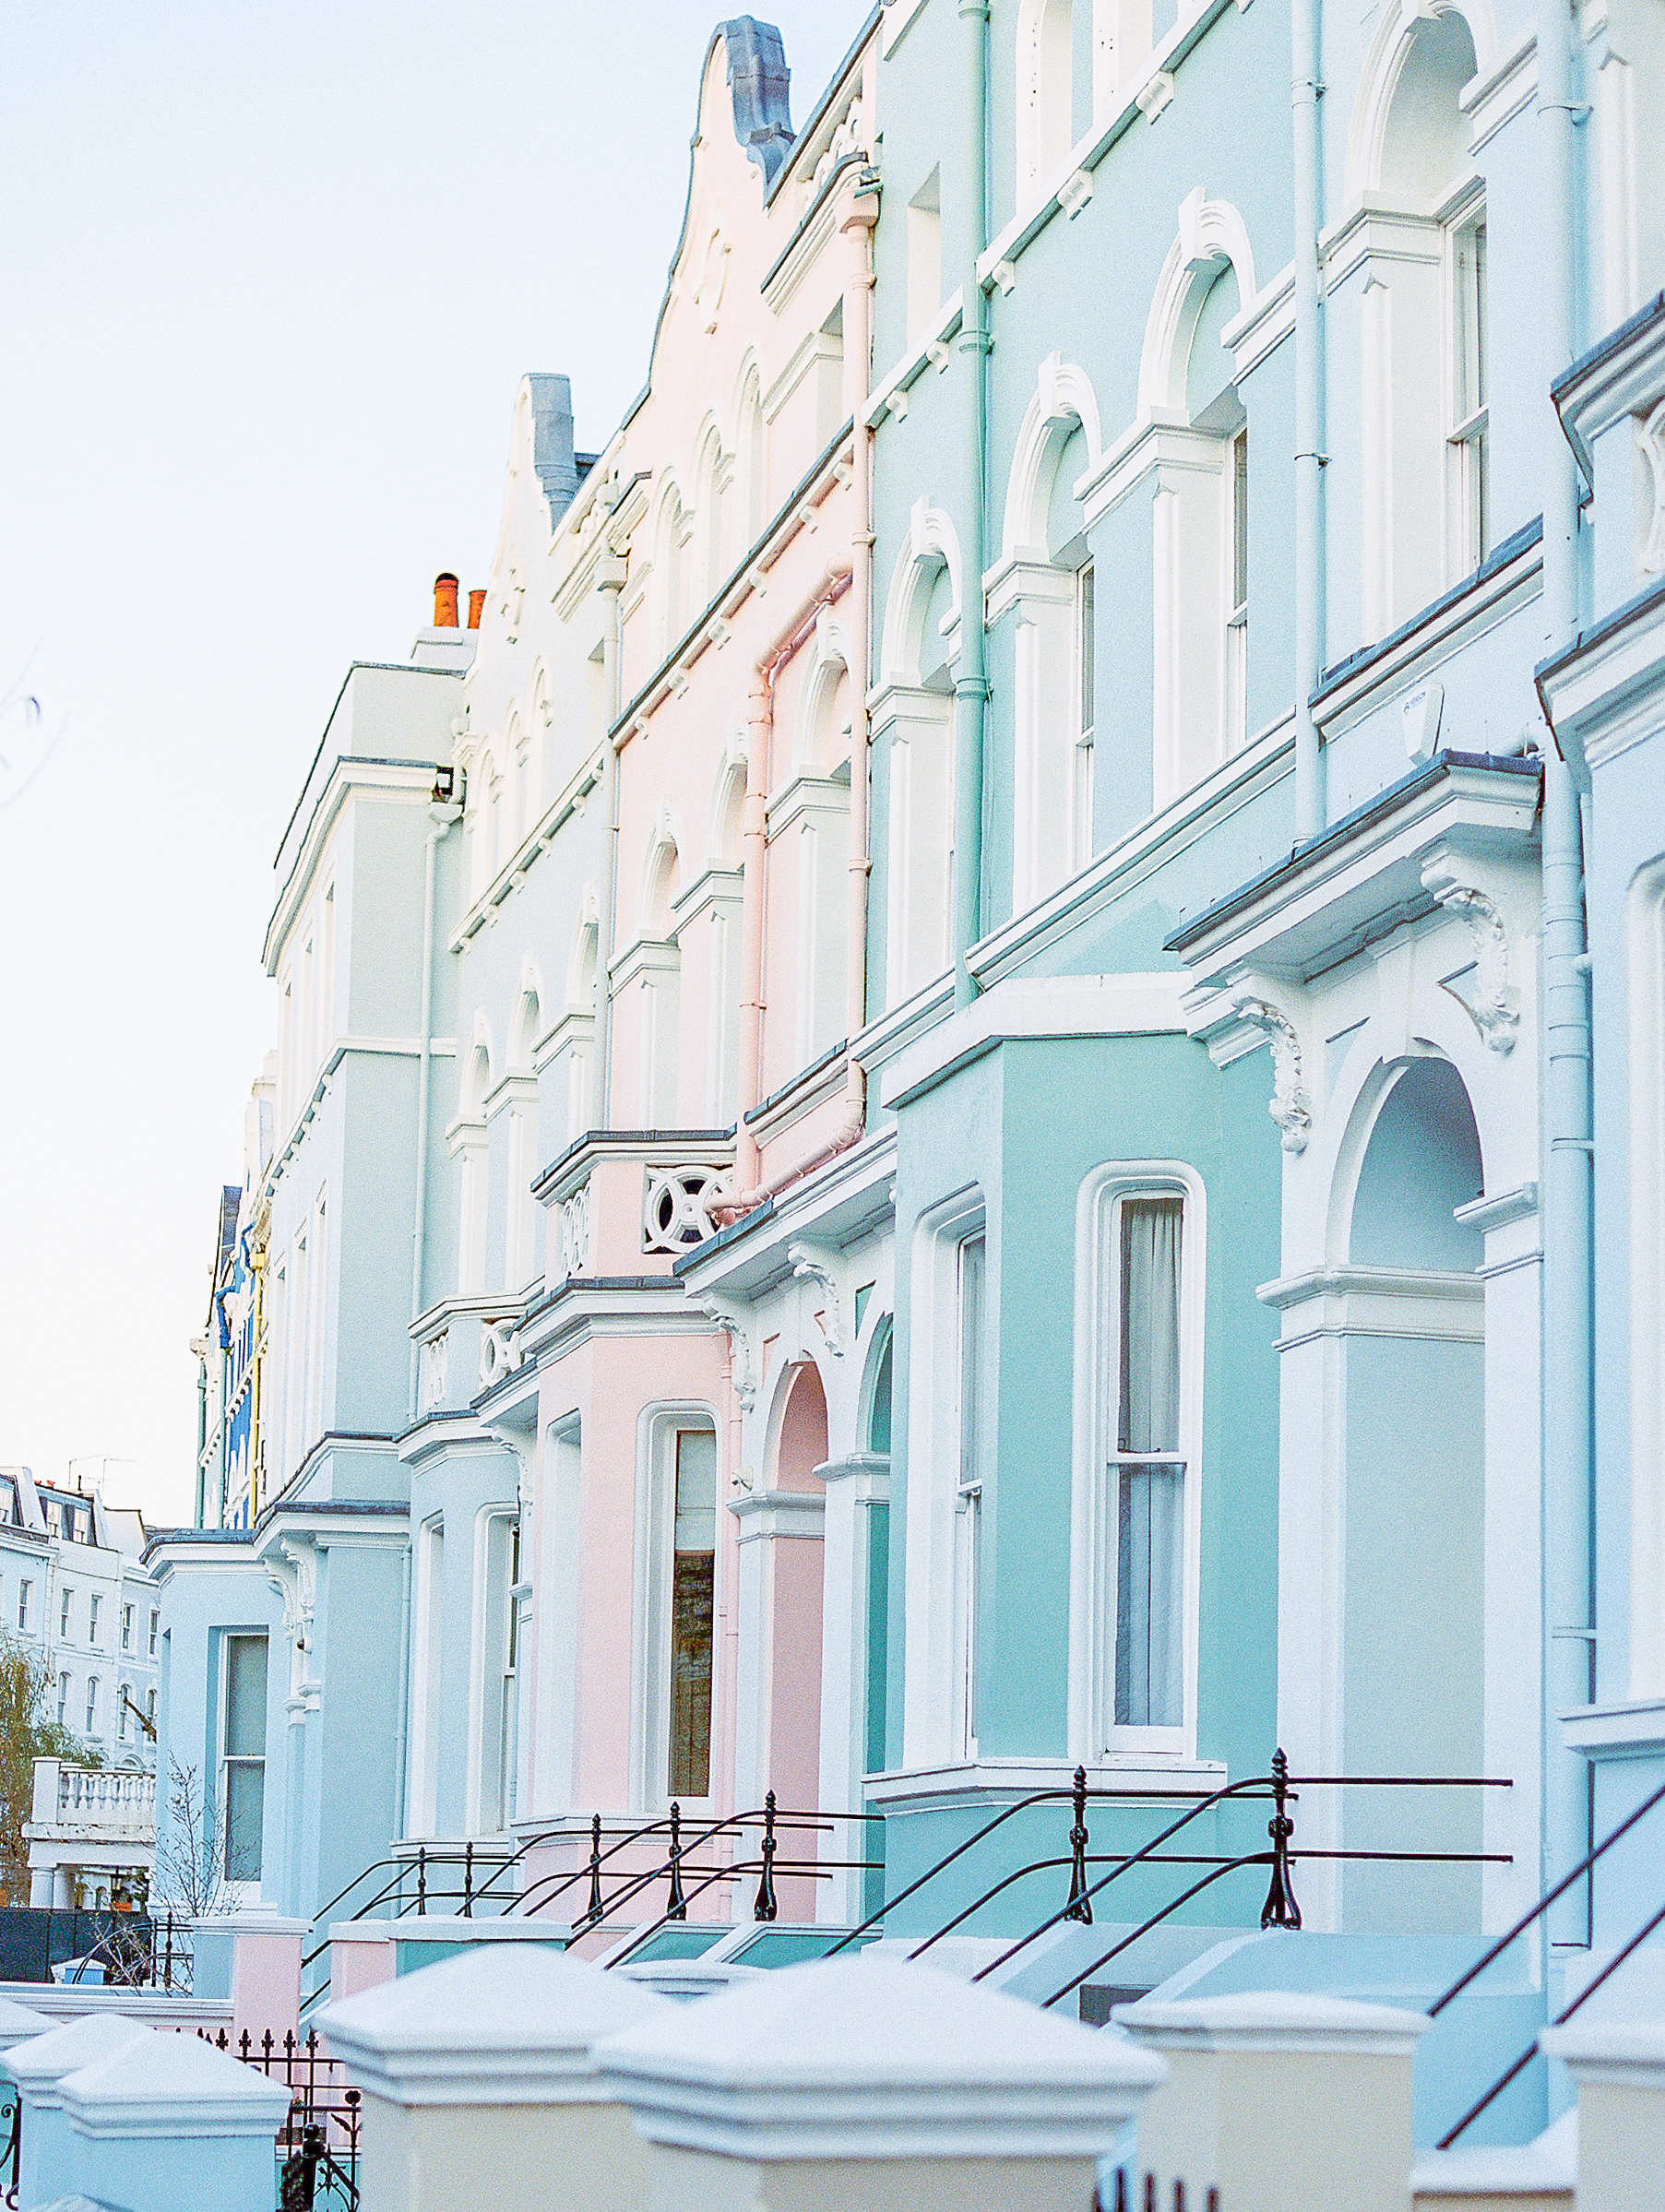 Spring in London Travel Blog by Destination Wedding Photographer Katie Trauffer - Notting Hill pastel colored row homes